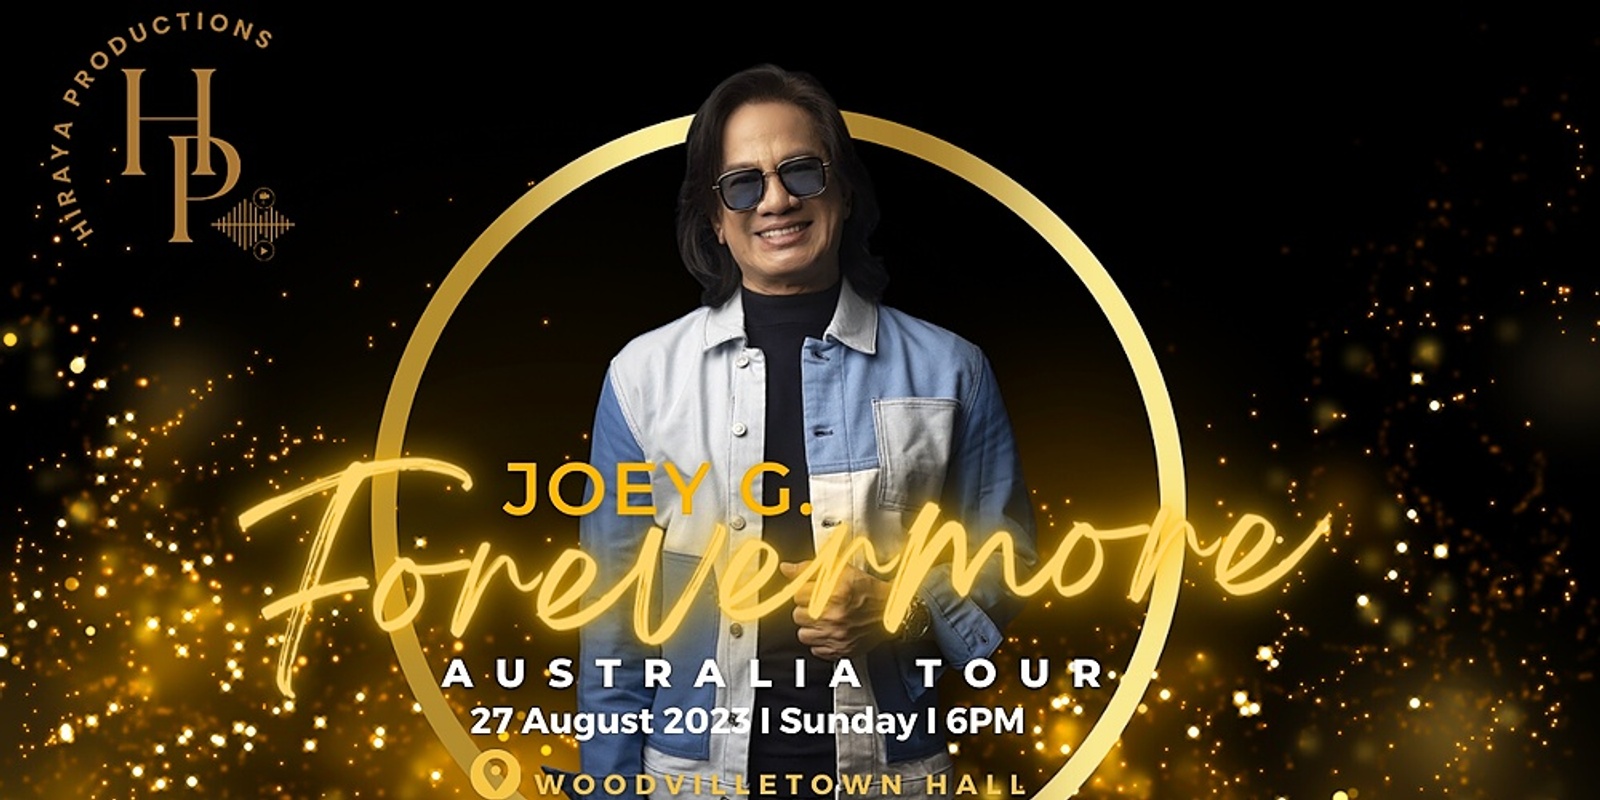 chris archunde recommends joeys world tour age pic